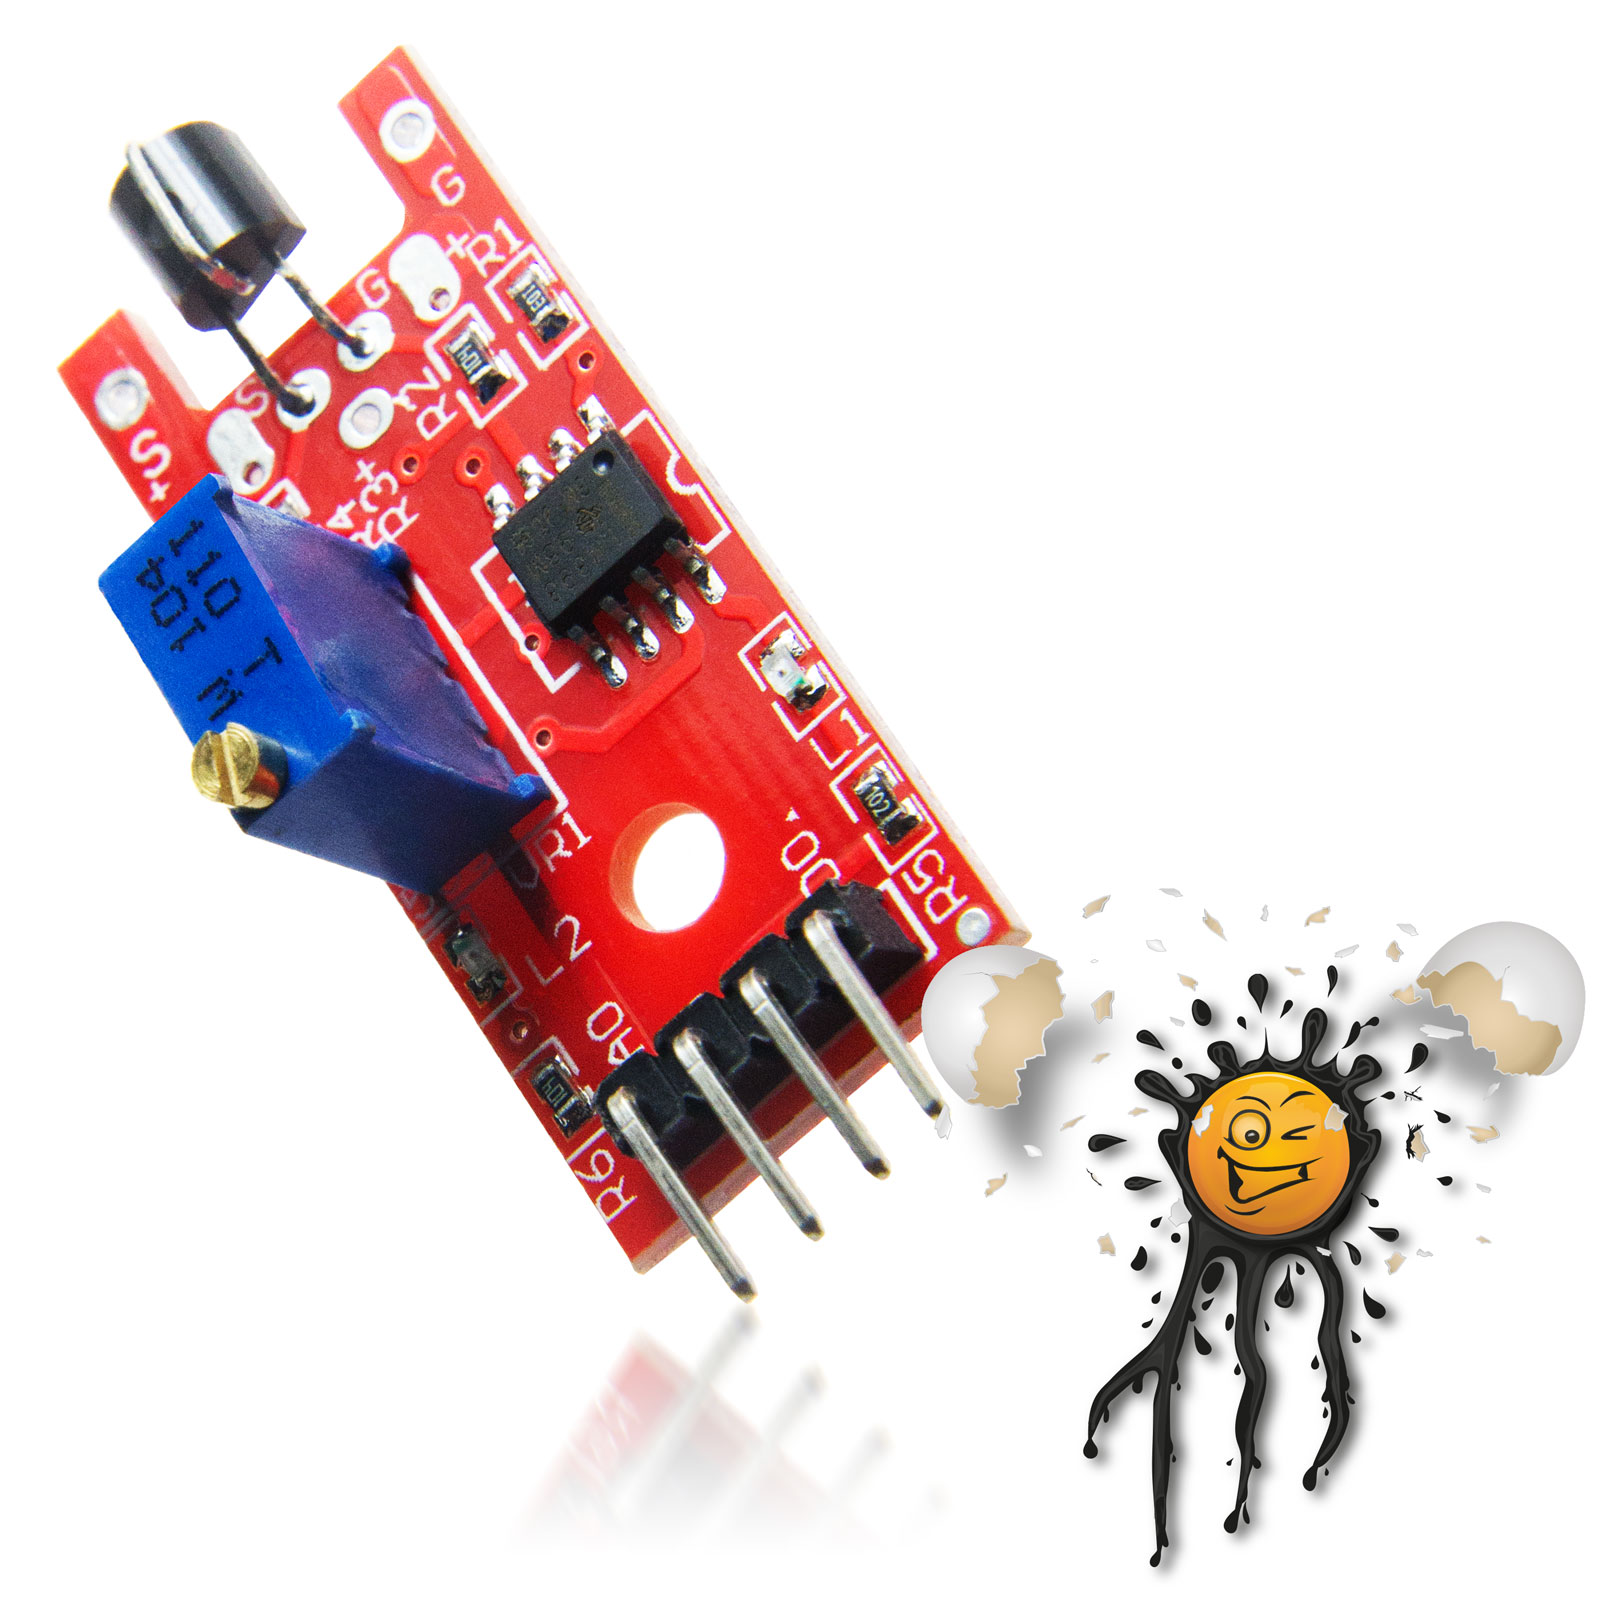 KY-036 Metall Touch Kontakt Sensor KSP13 LM393 – IoT powered by